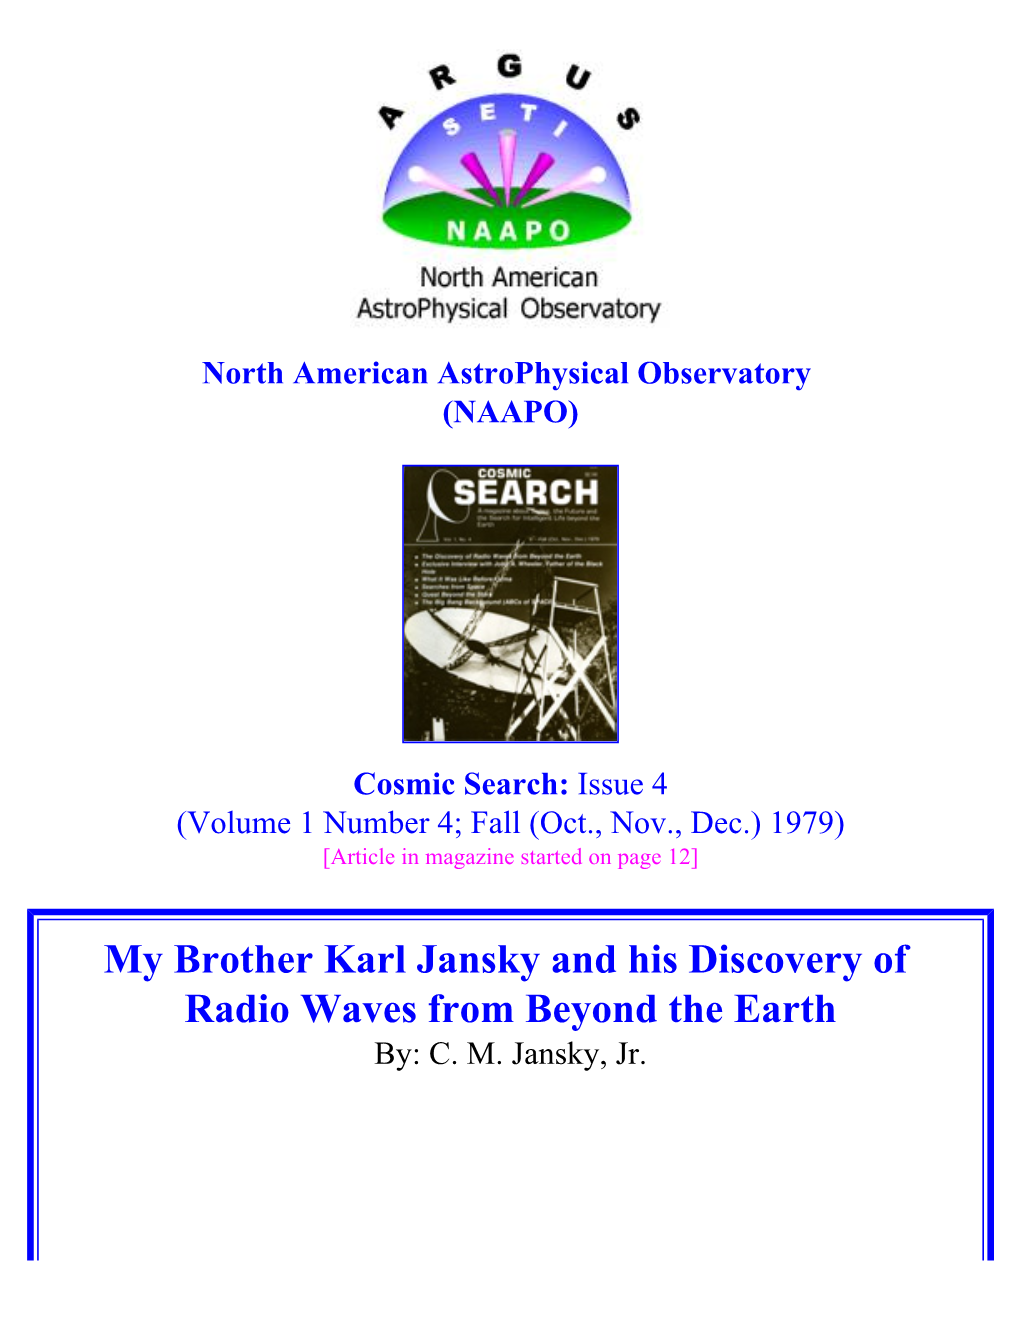 My Brother Karl Jansky and His Discovery of Radio Waves from Beyond the Earth By: C